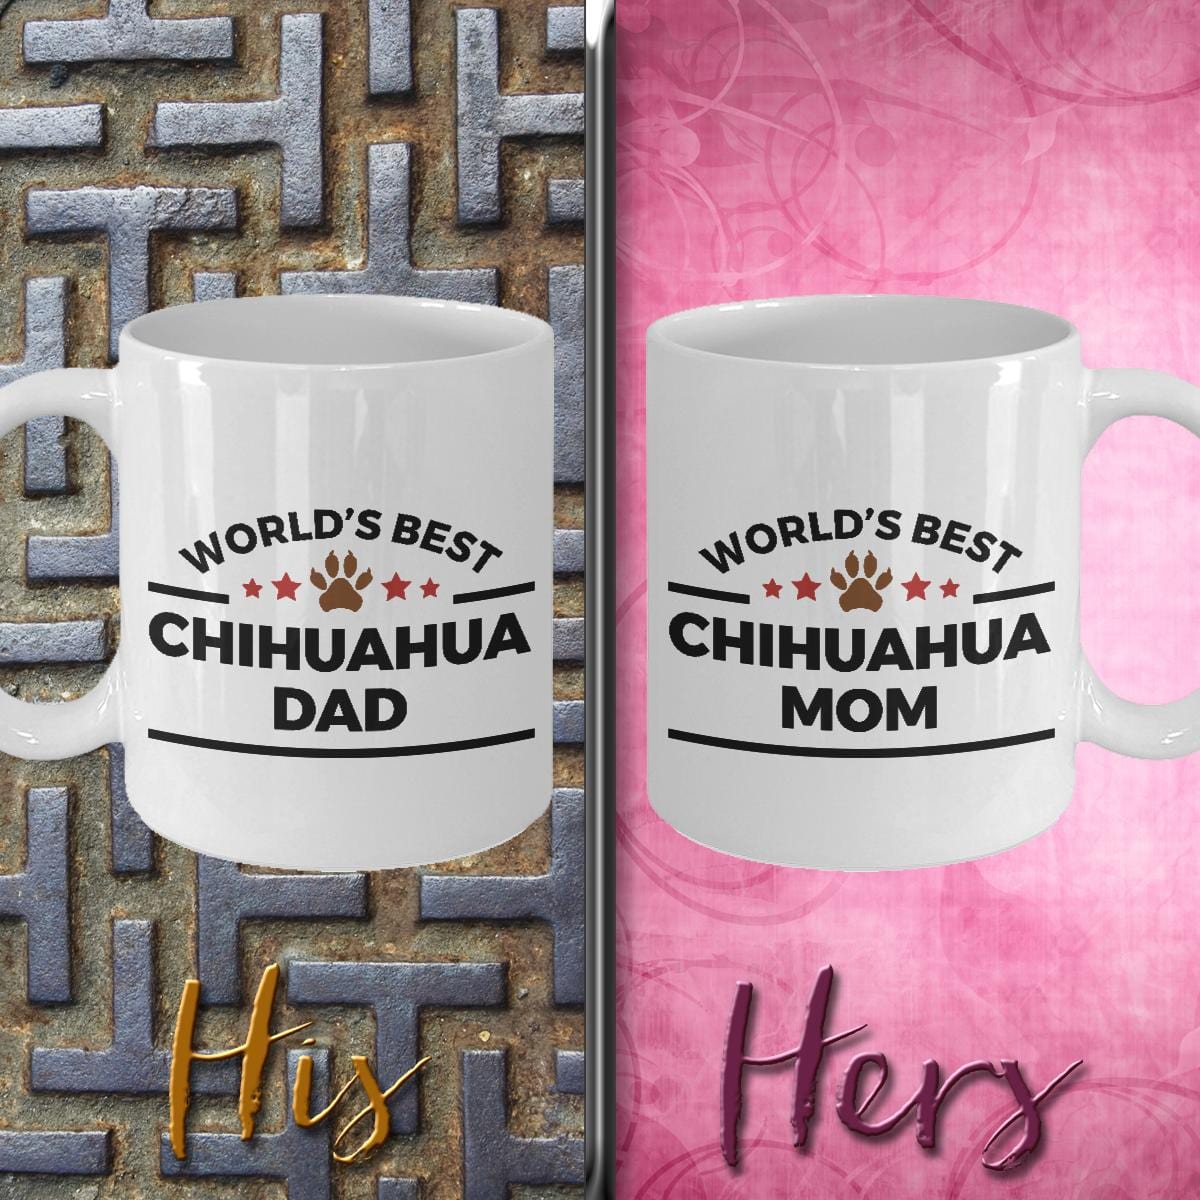 World's Best Chihuahua Mom and Dad Couples Mug Set of 2